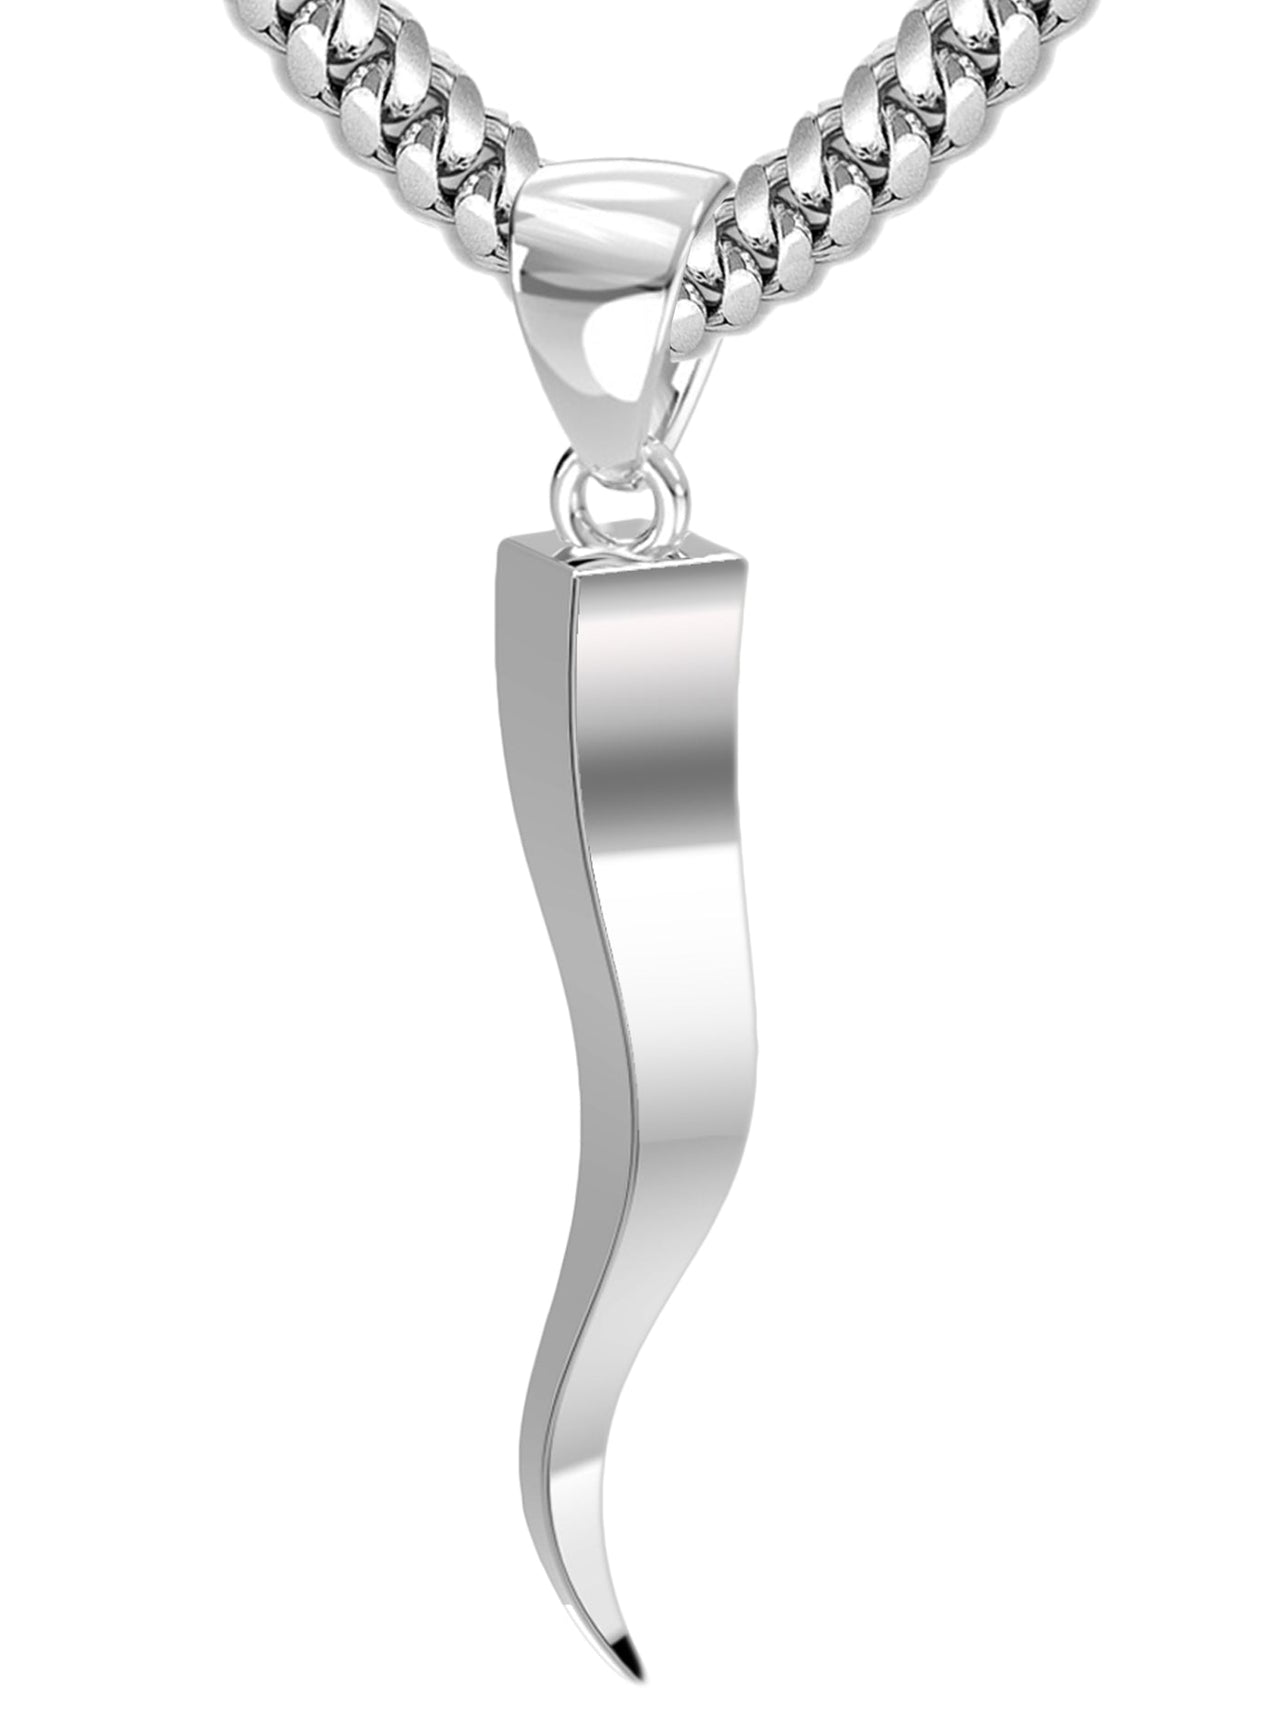 Men's Squared 925 Sterling Silver Italian Horn Good Luck Cornicello Pendant Necklace, 28mm - US Jewels